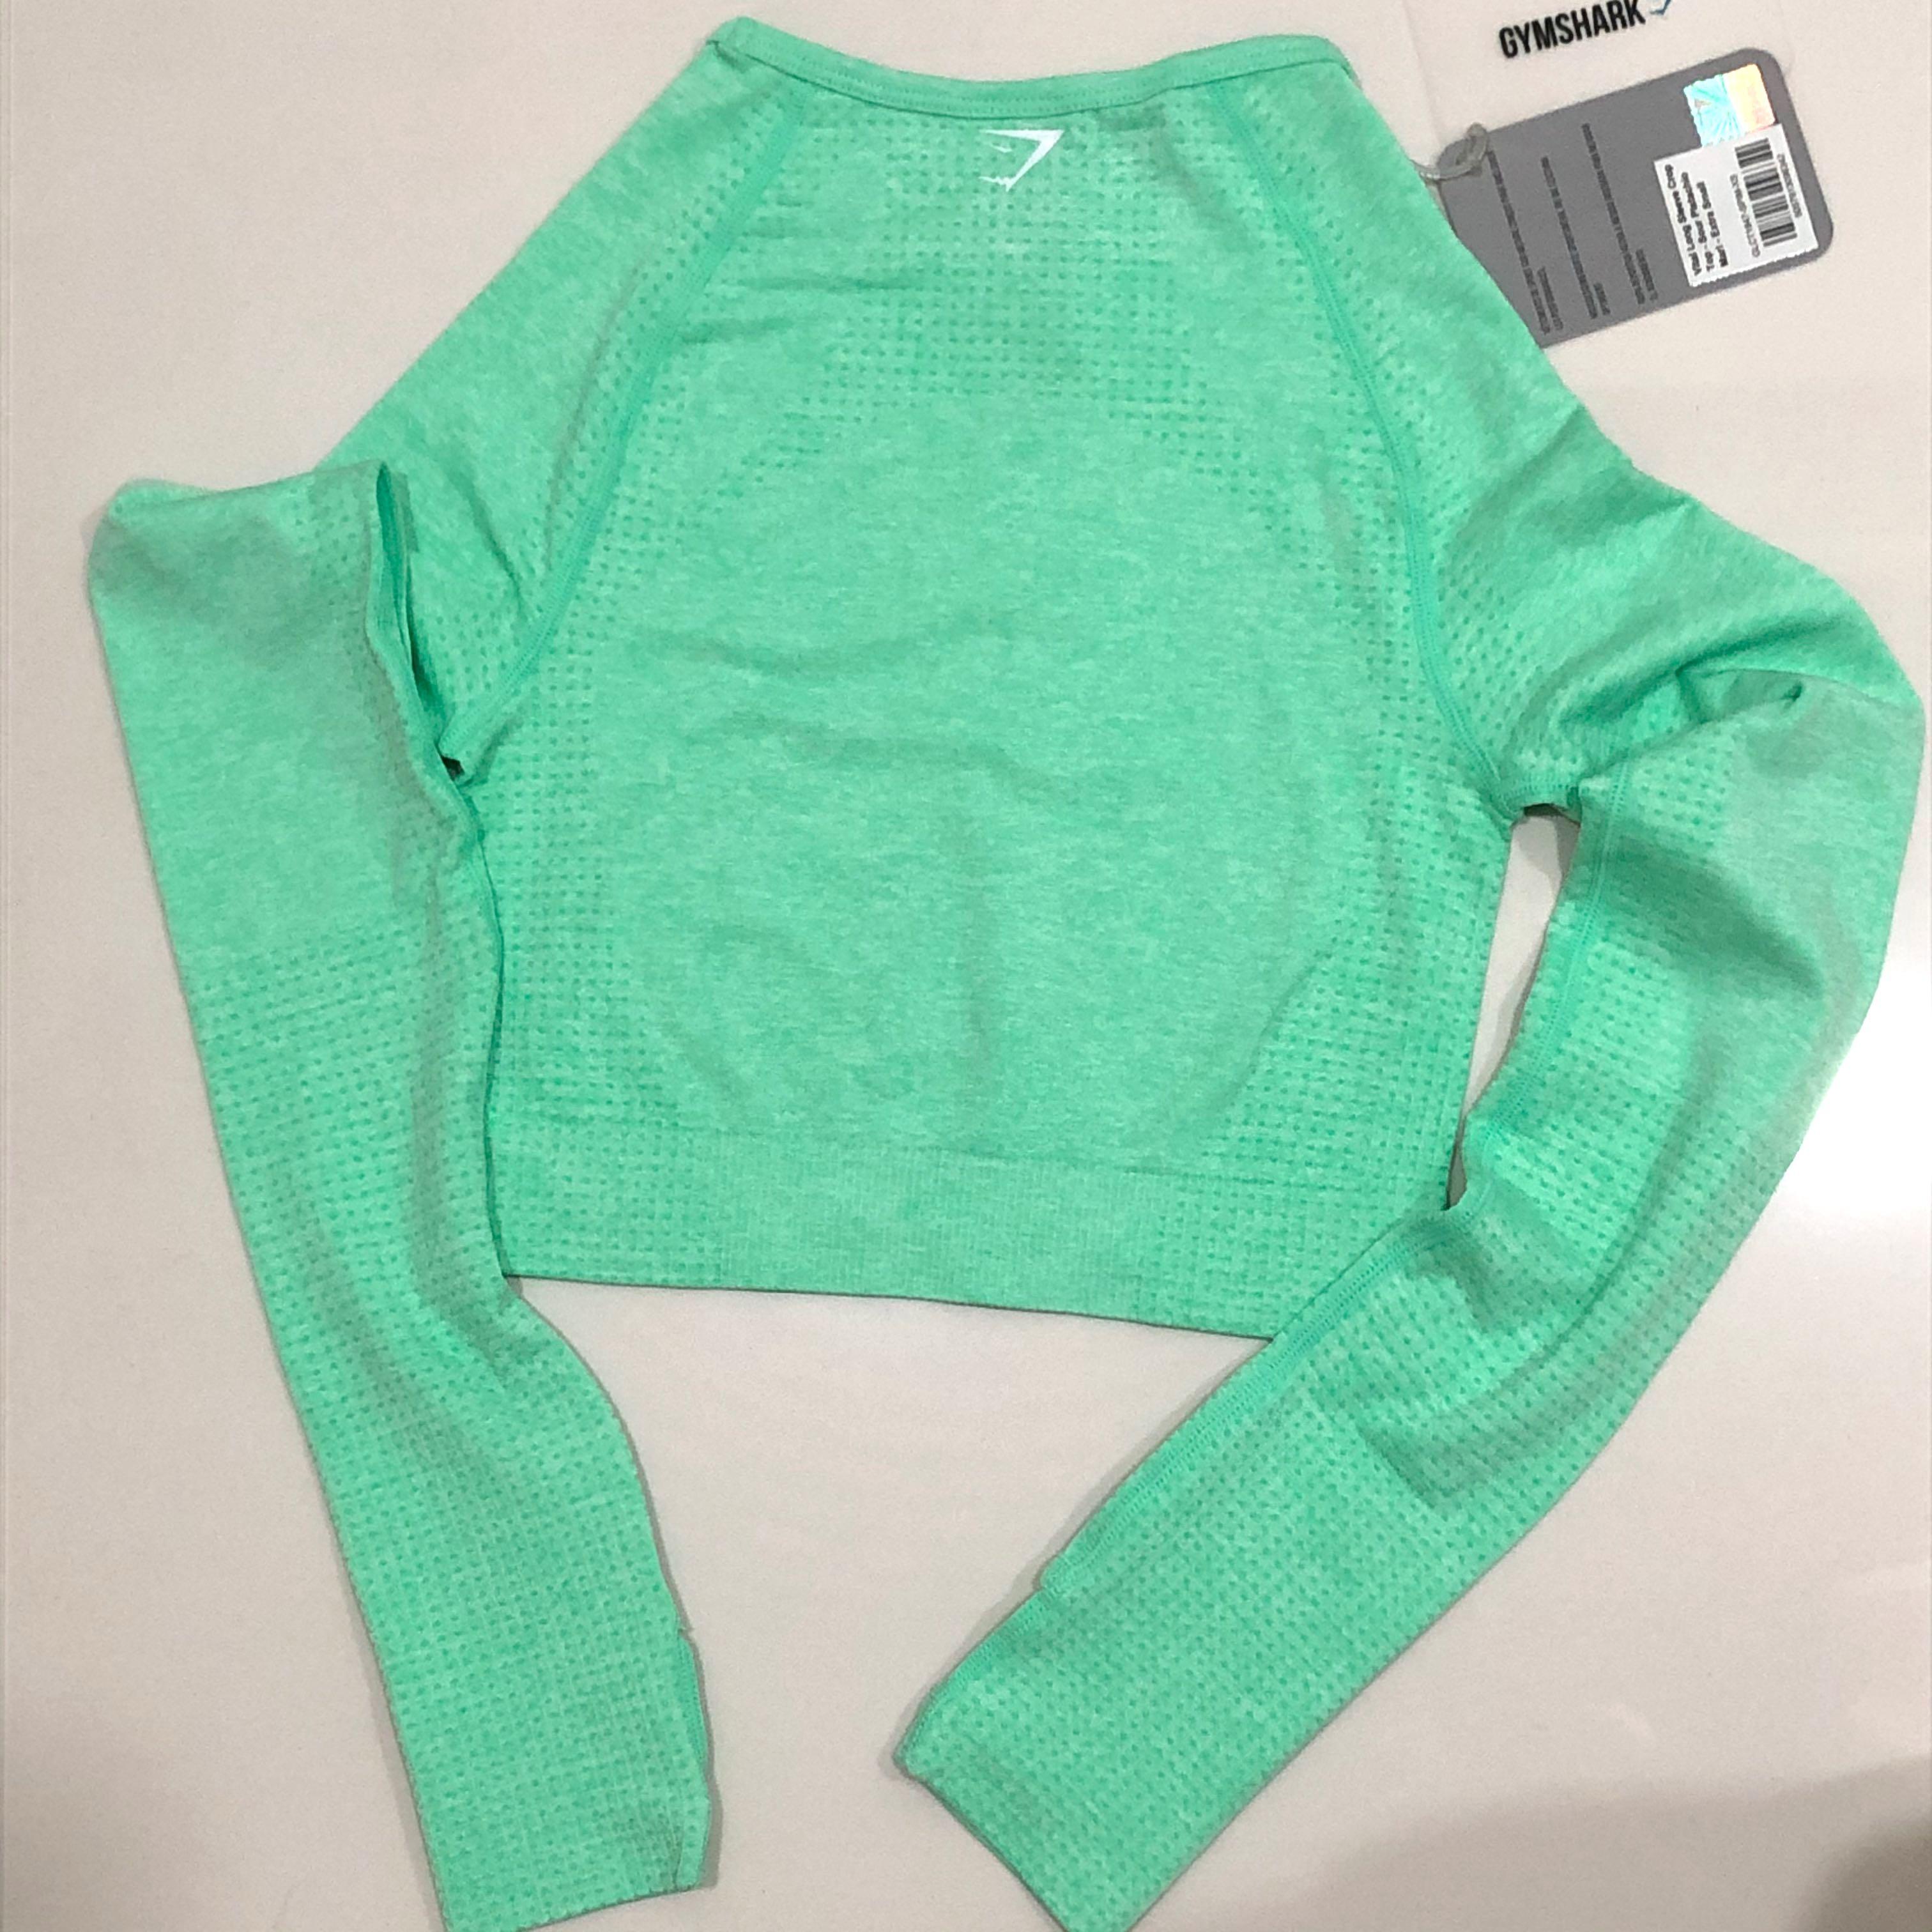 Gymshark Vital Seamless Long Sleeve Crop Top - Sour Pistachio Marl XS Extra  Small, Women's Fashion, Activewear on Carousell